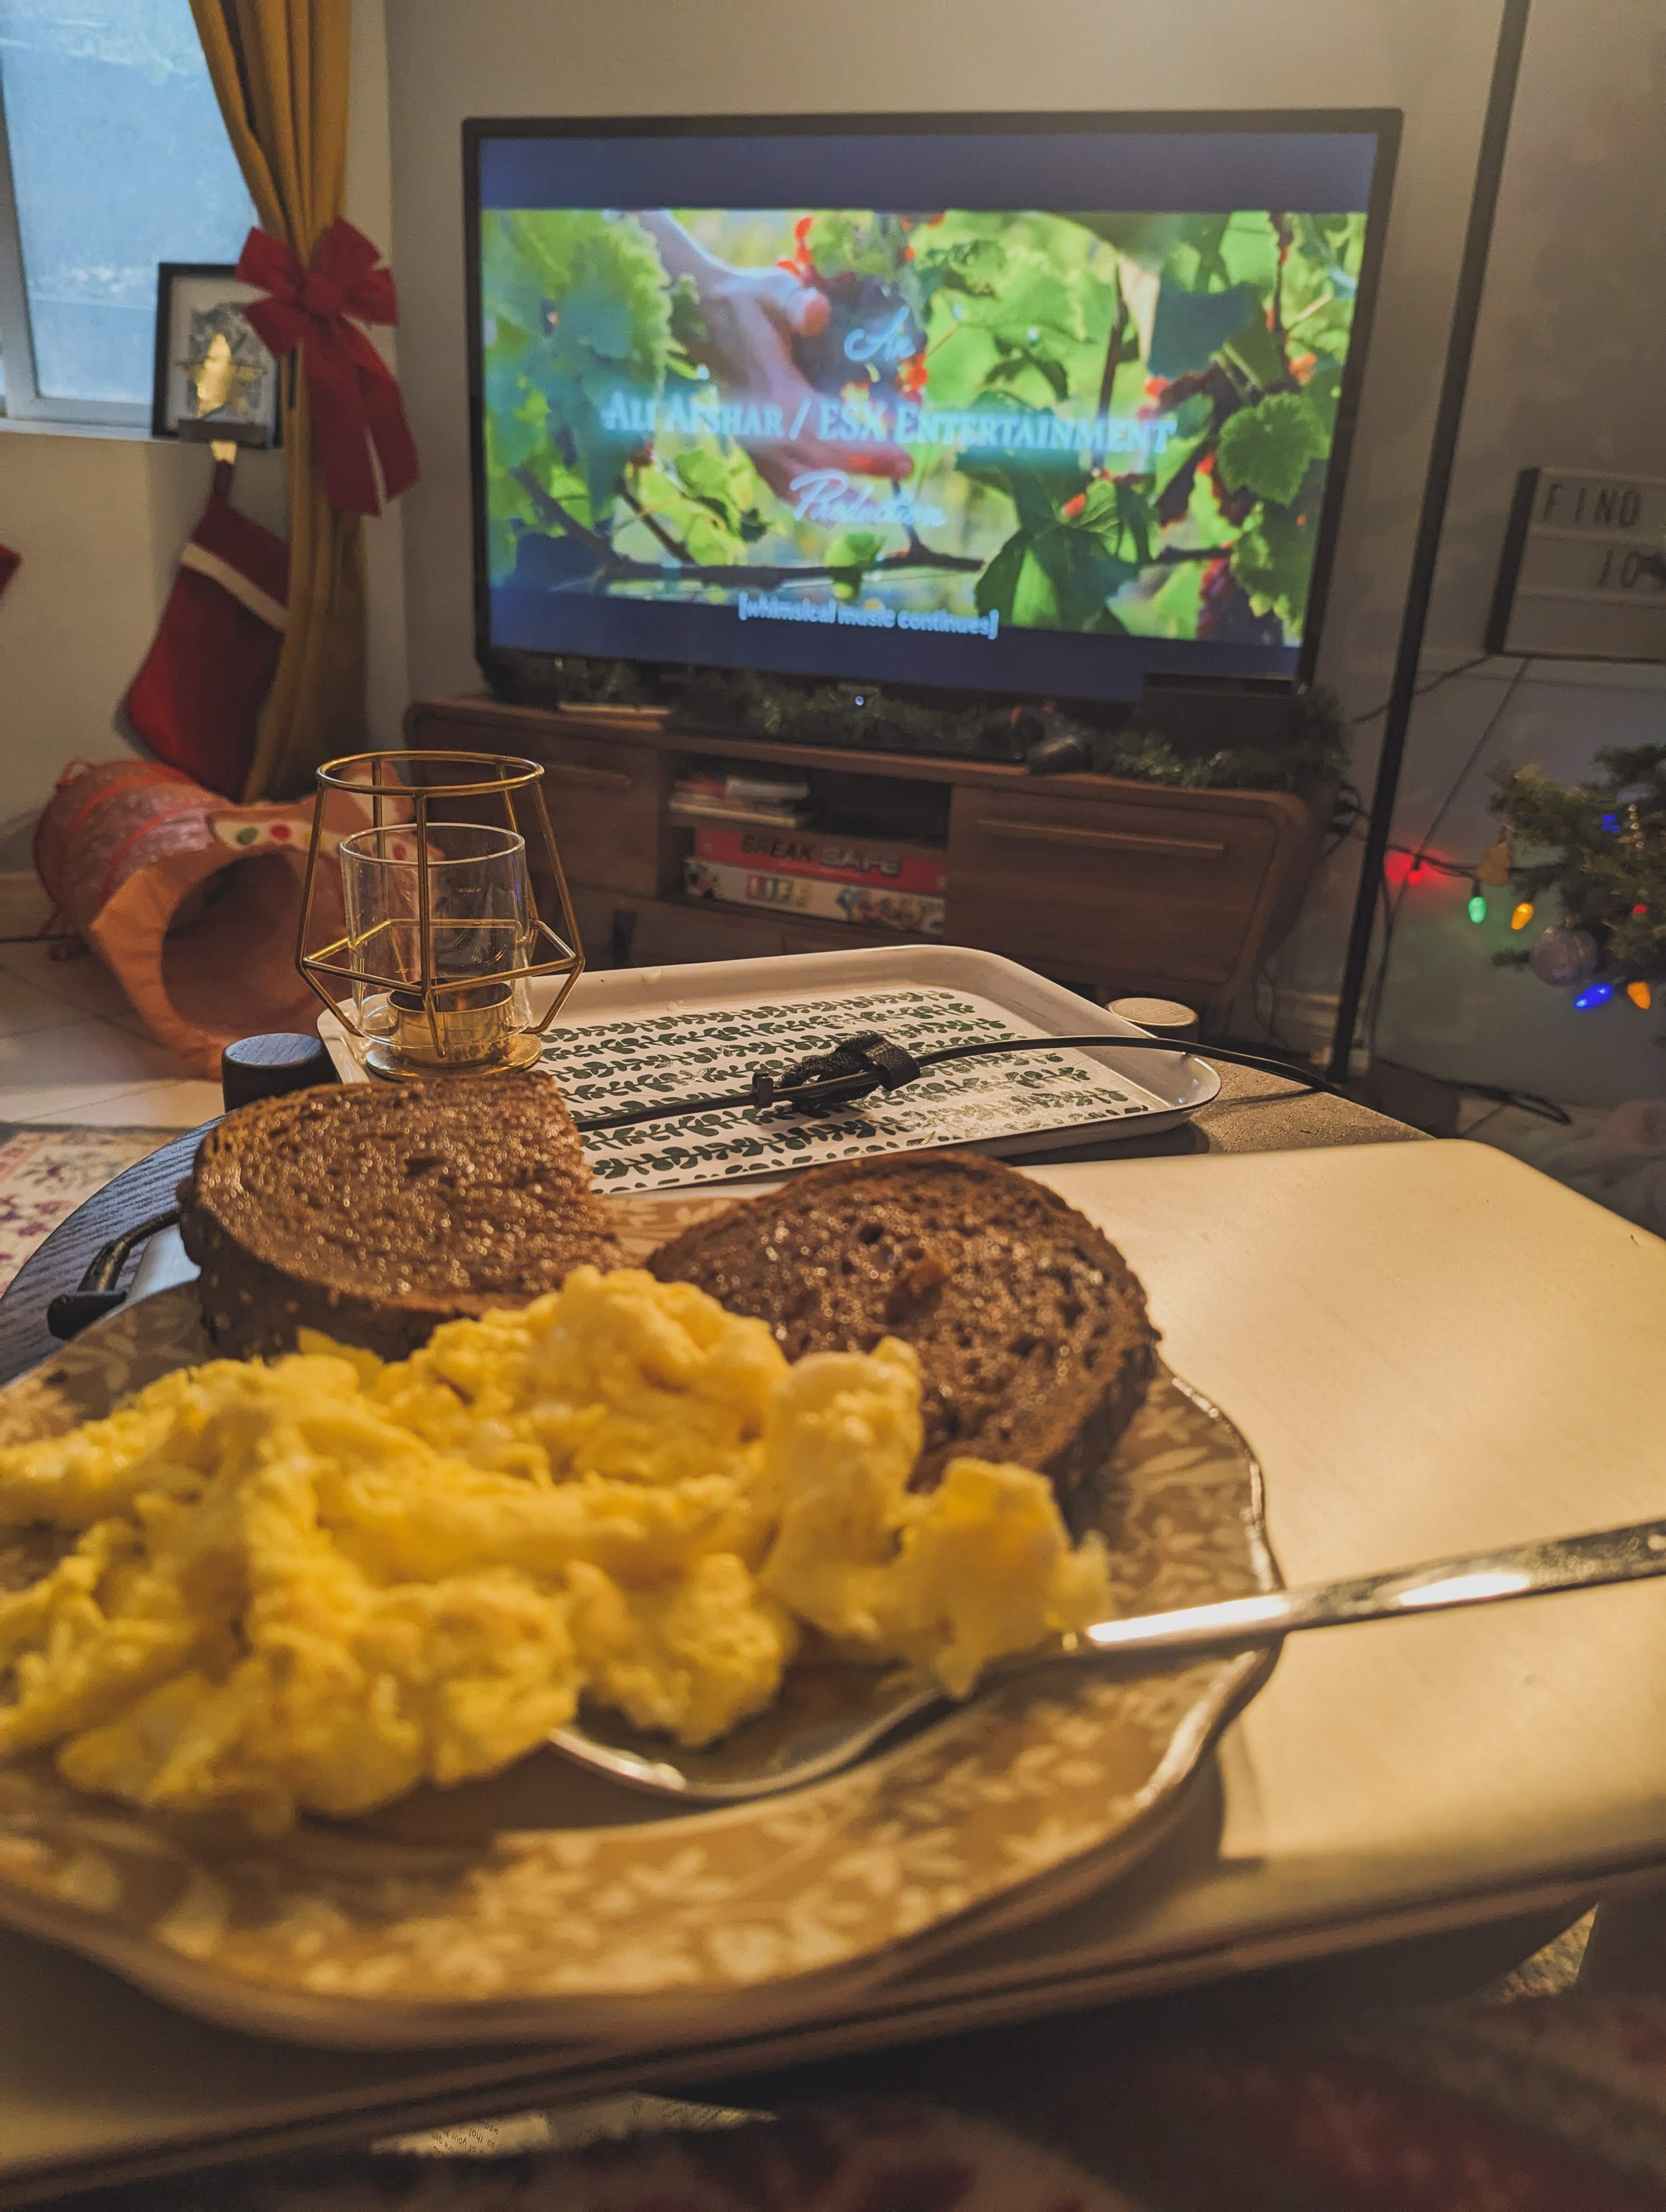  Made myself a nice meal for breakfast and watched a terrible Christmas movie! 